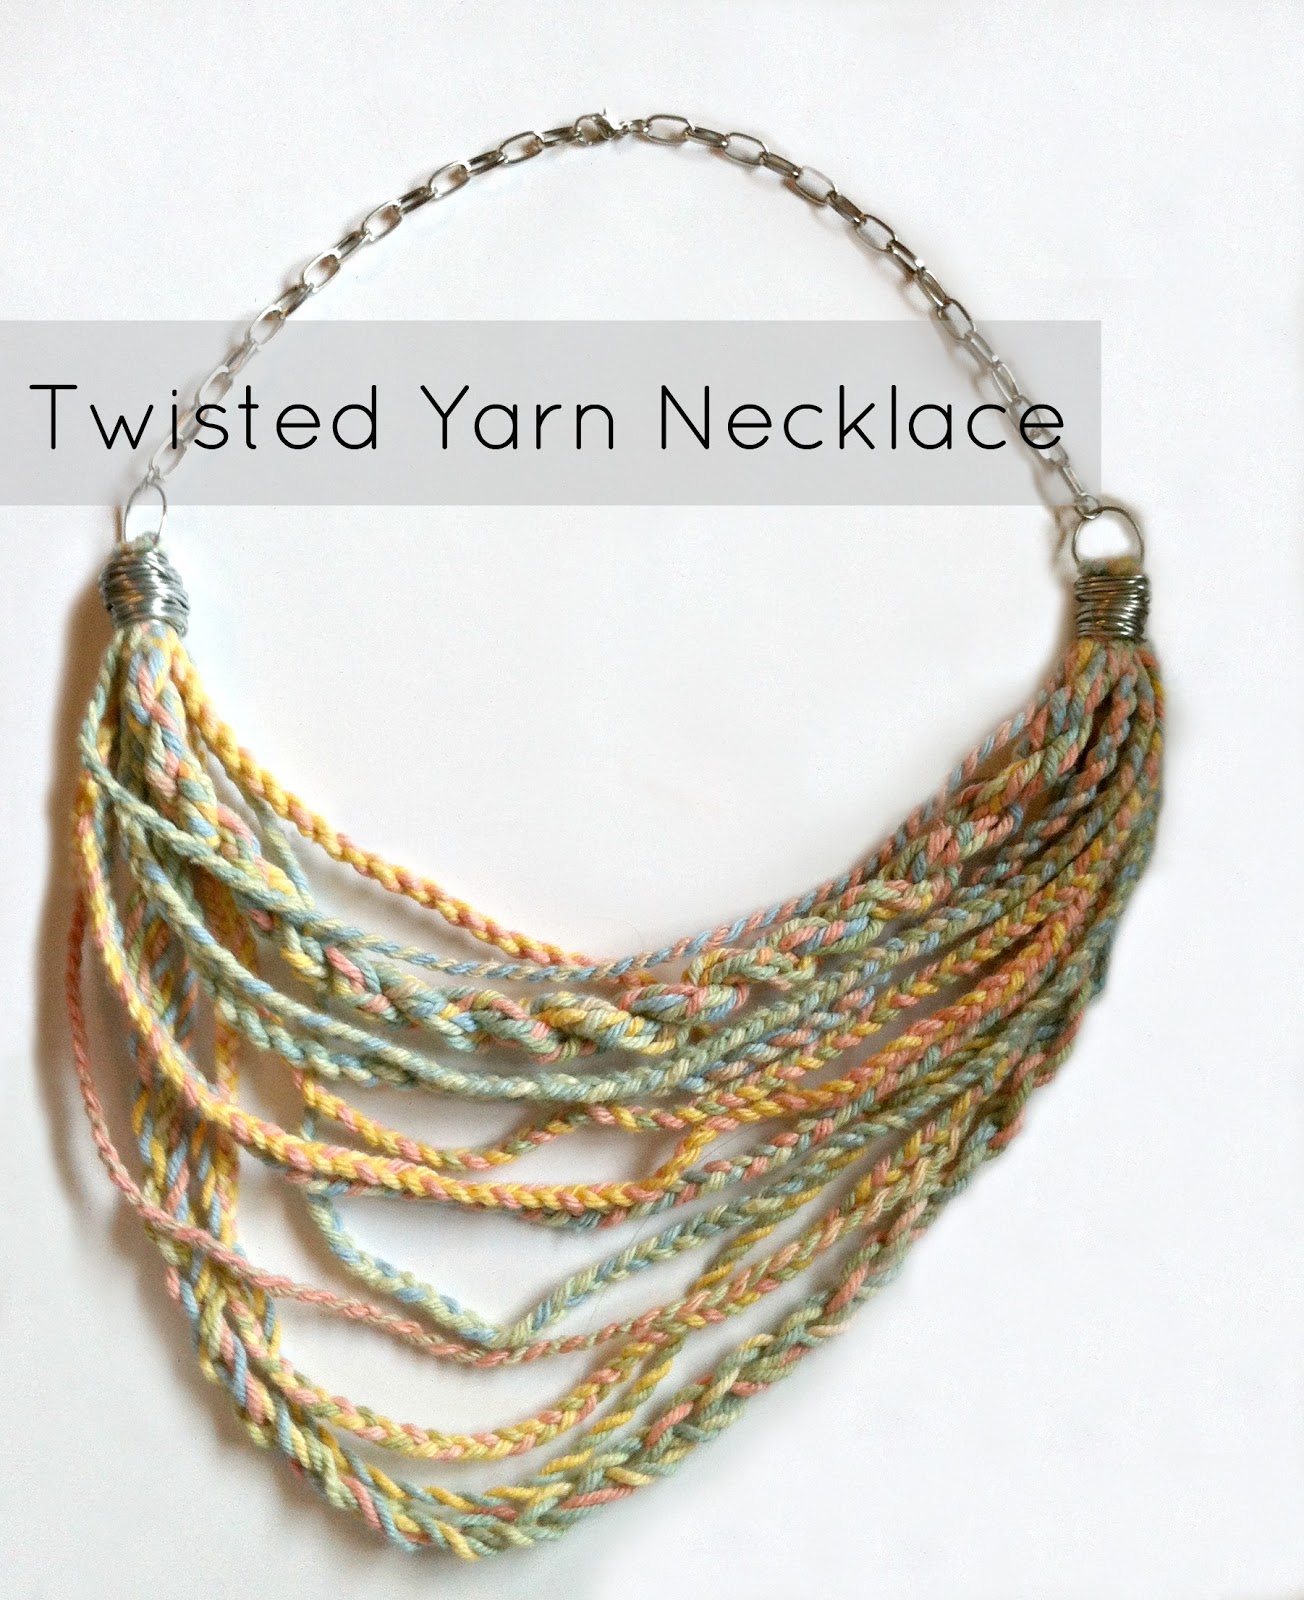 Yarn Project Number One: How to dress your neck on the cheap.